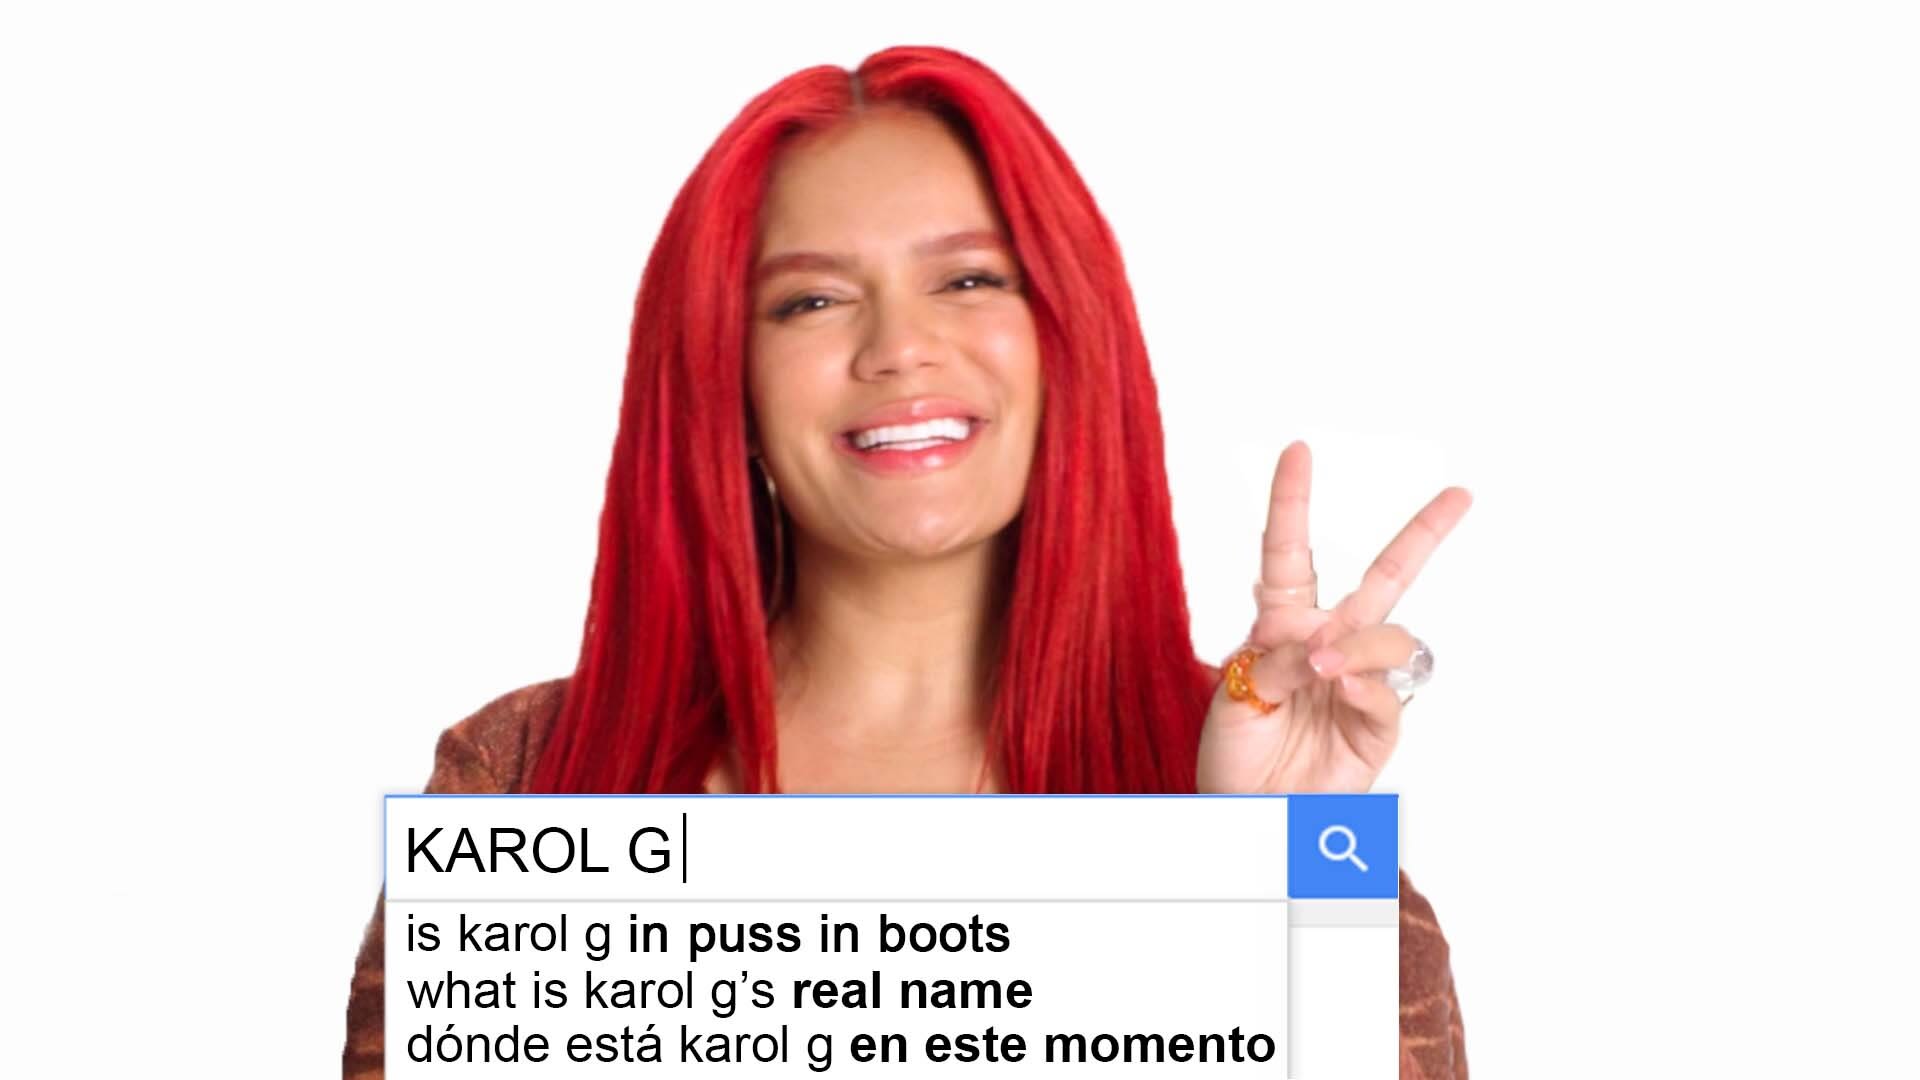 Watch KAROL G Answers the Web's Most Searched Questions